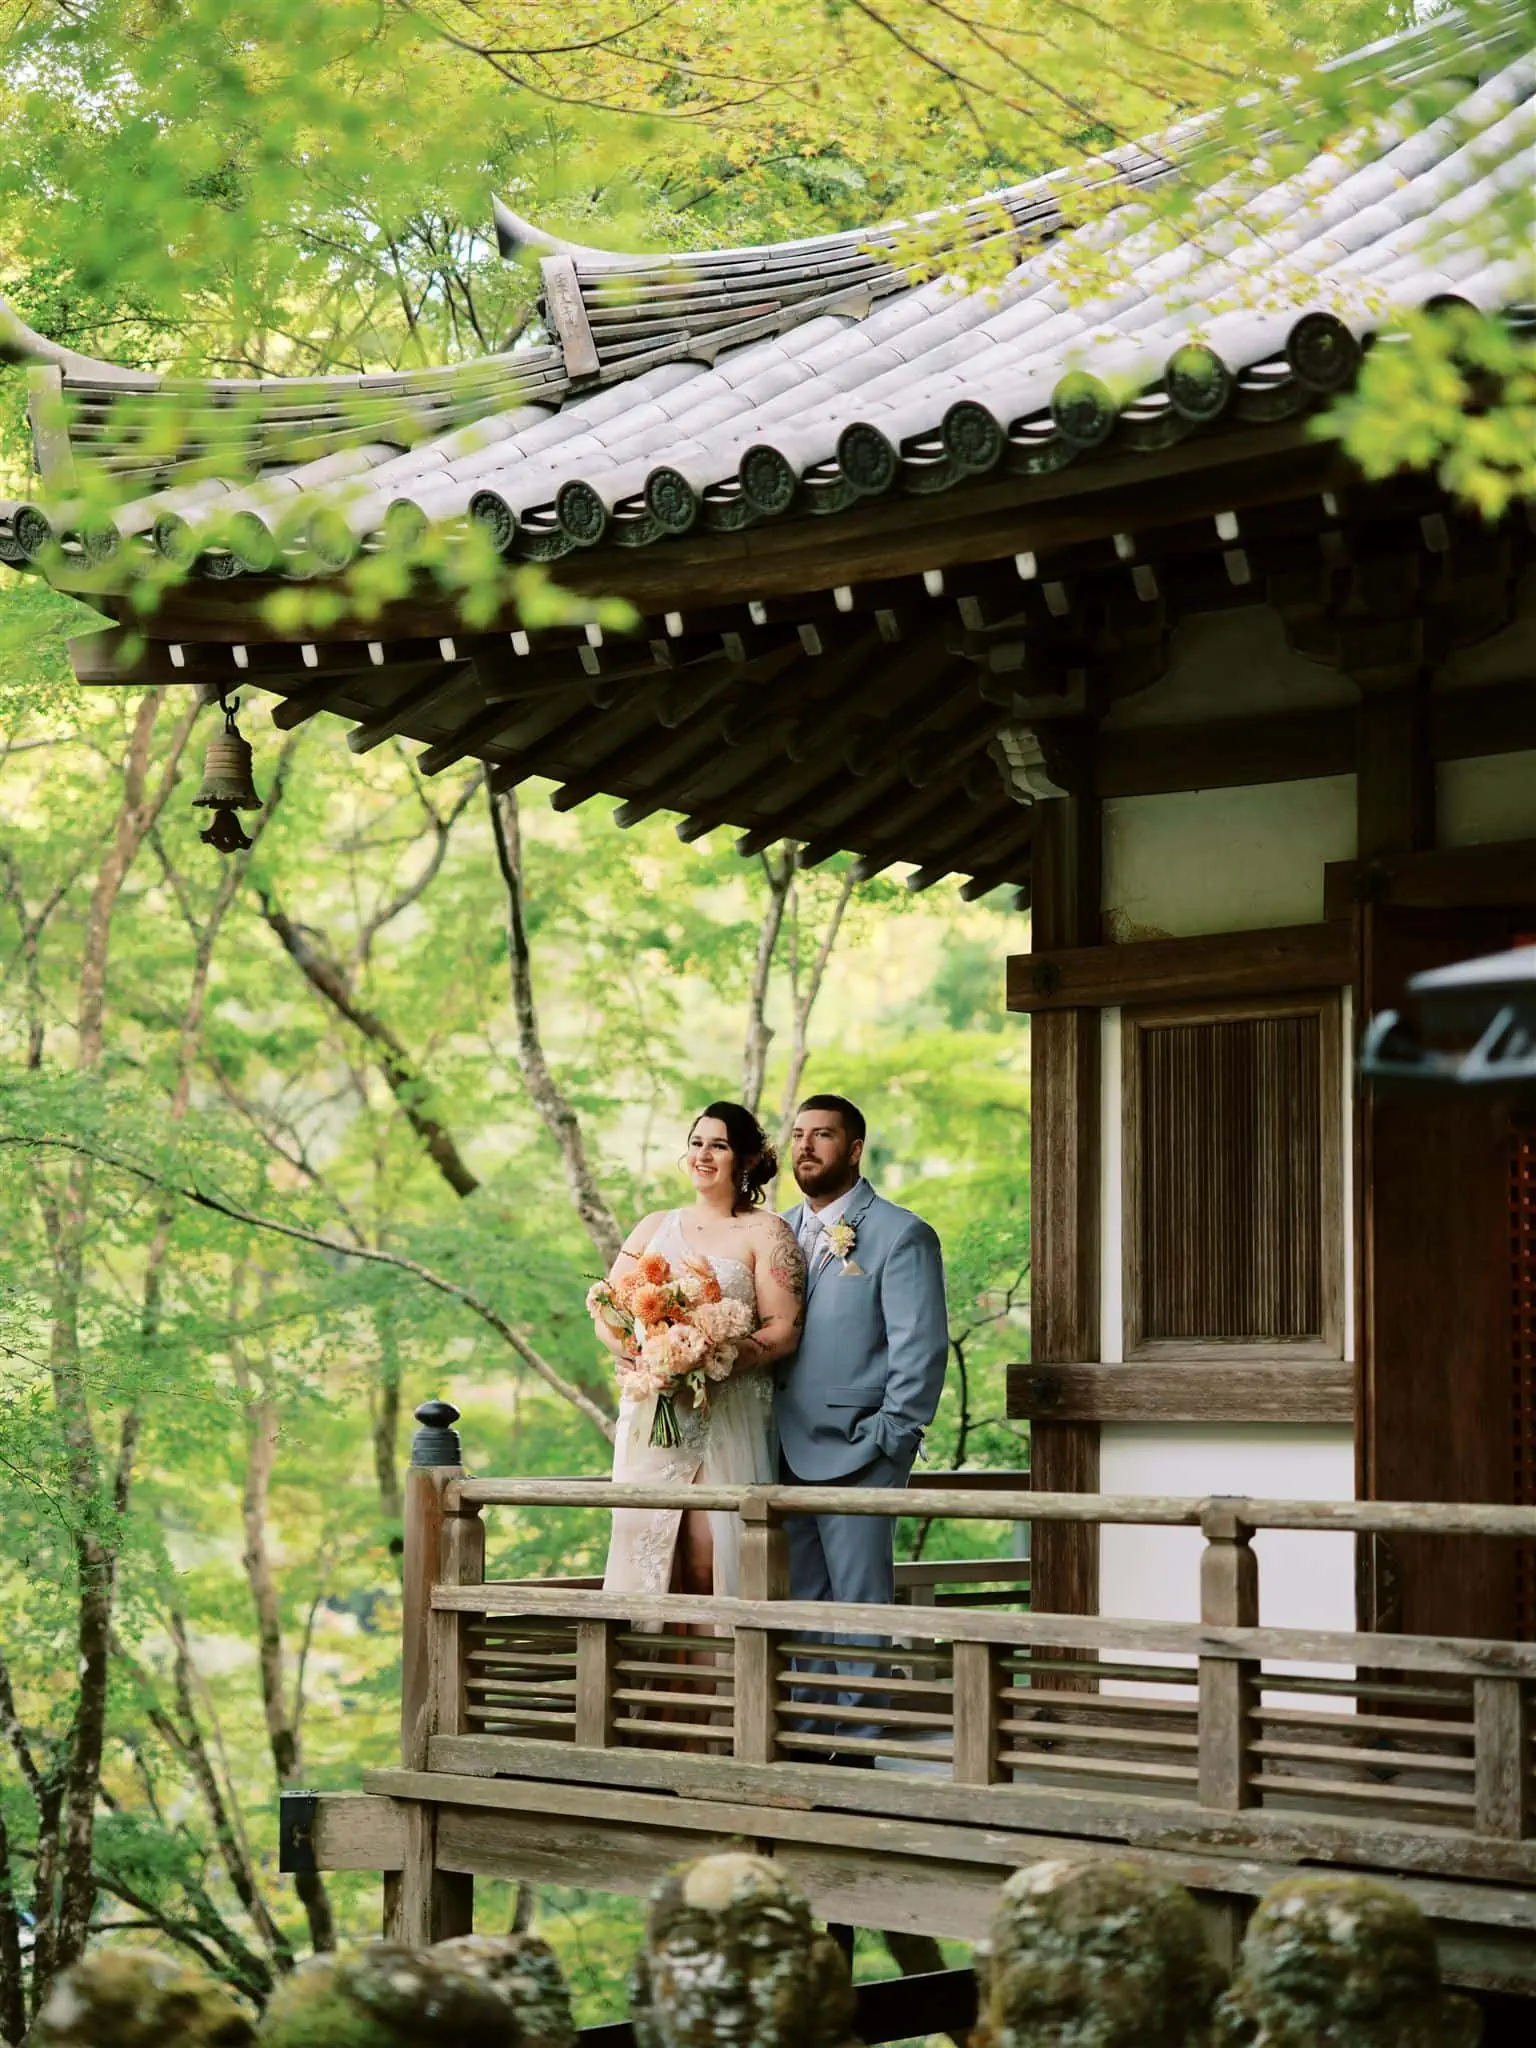 Japan Elopement Wedding Photographer, Planner & Videographer | A Queenstown Heli-Wedding & Elopement Package featuring a bride and groom standing on the porch of a Japanese house.